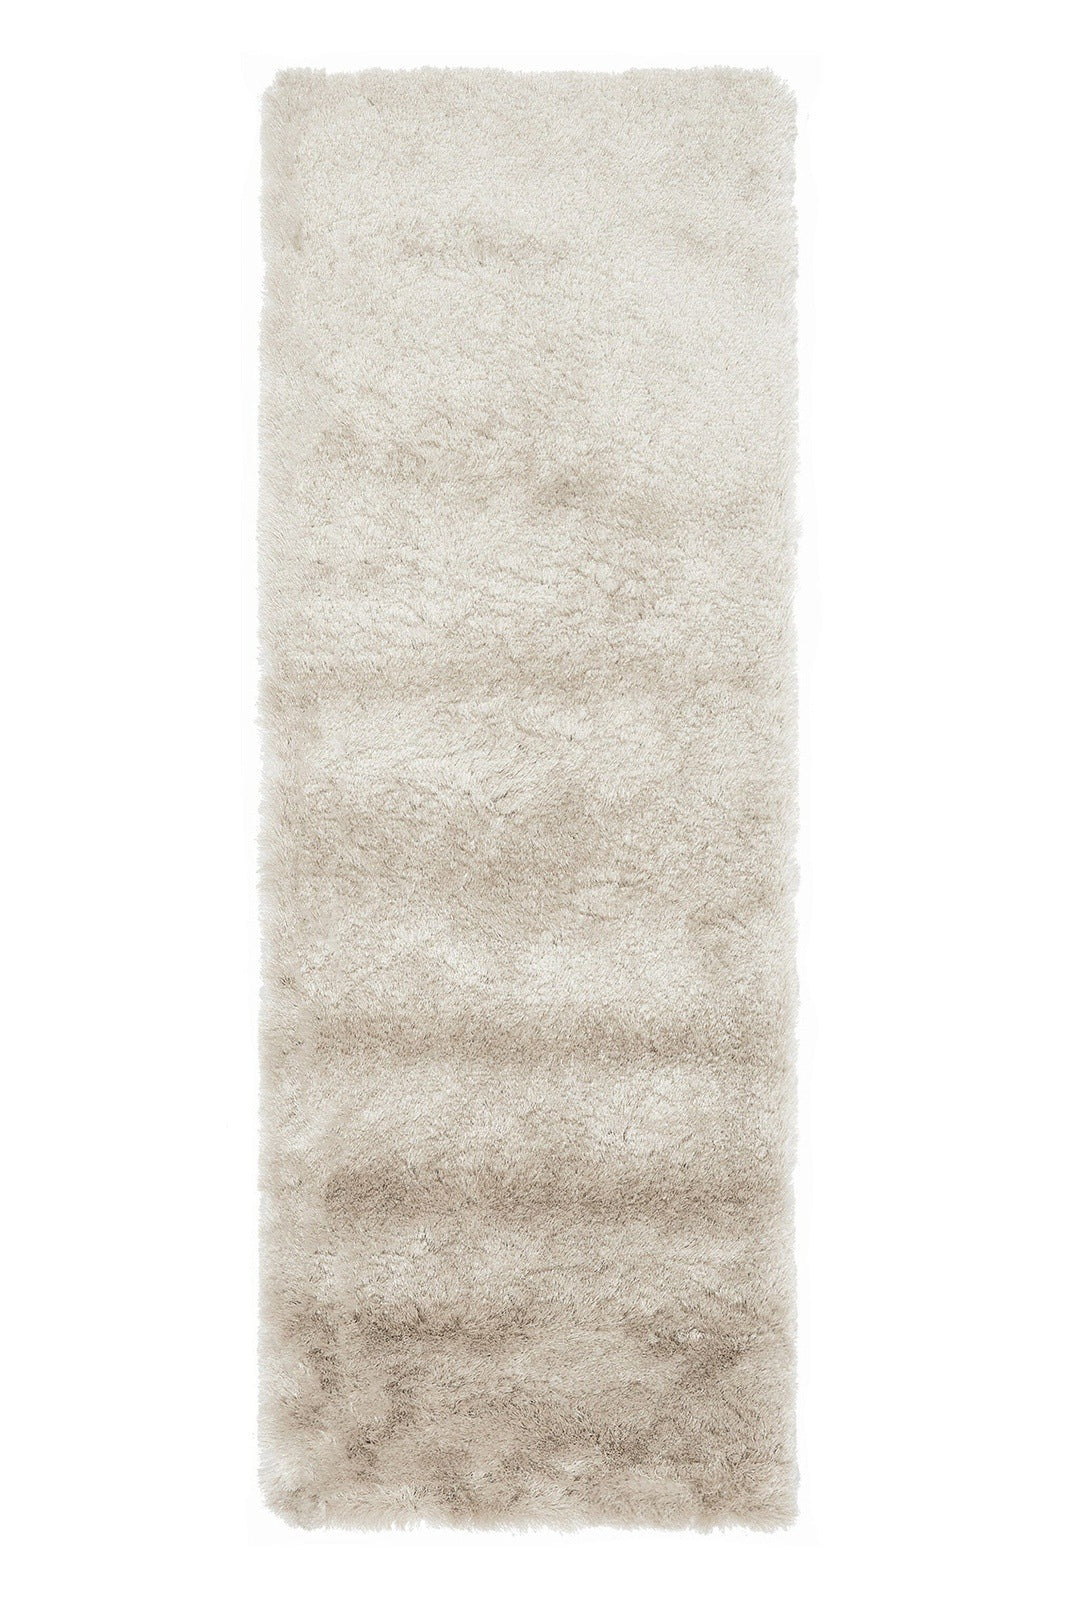 Asiatic Carpets Whisper Table Tufted Rug Champagne - 65 x 135cm